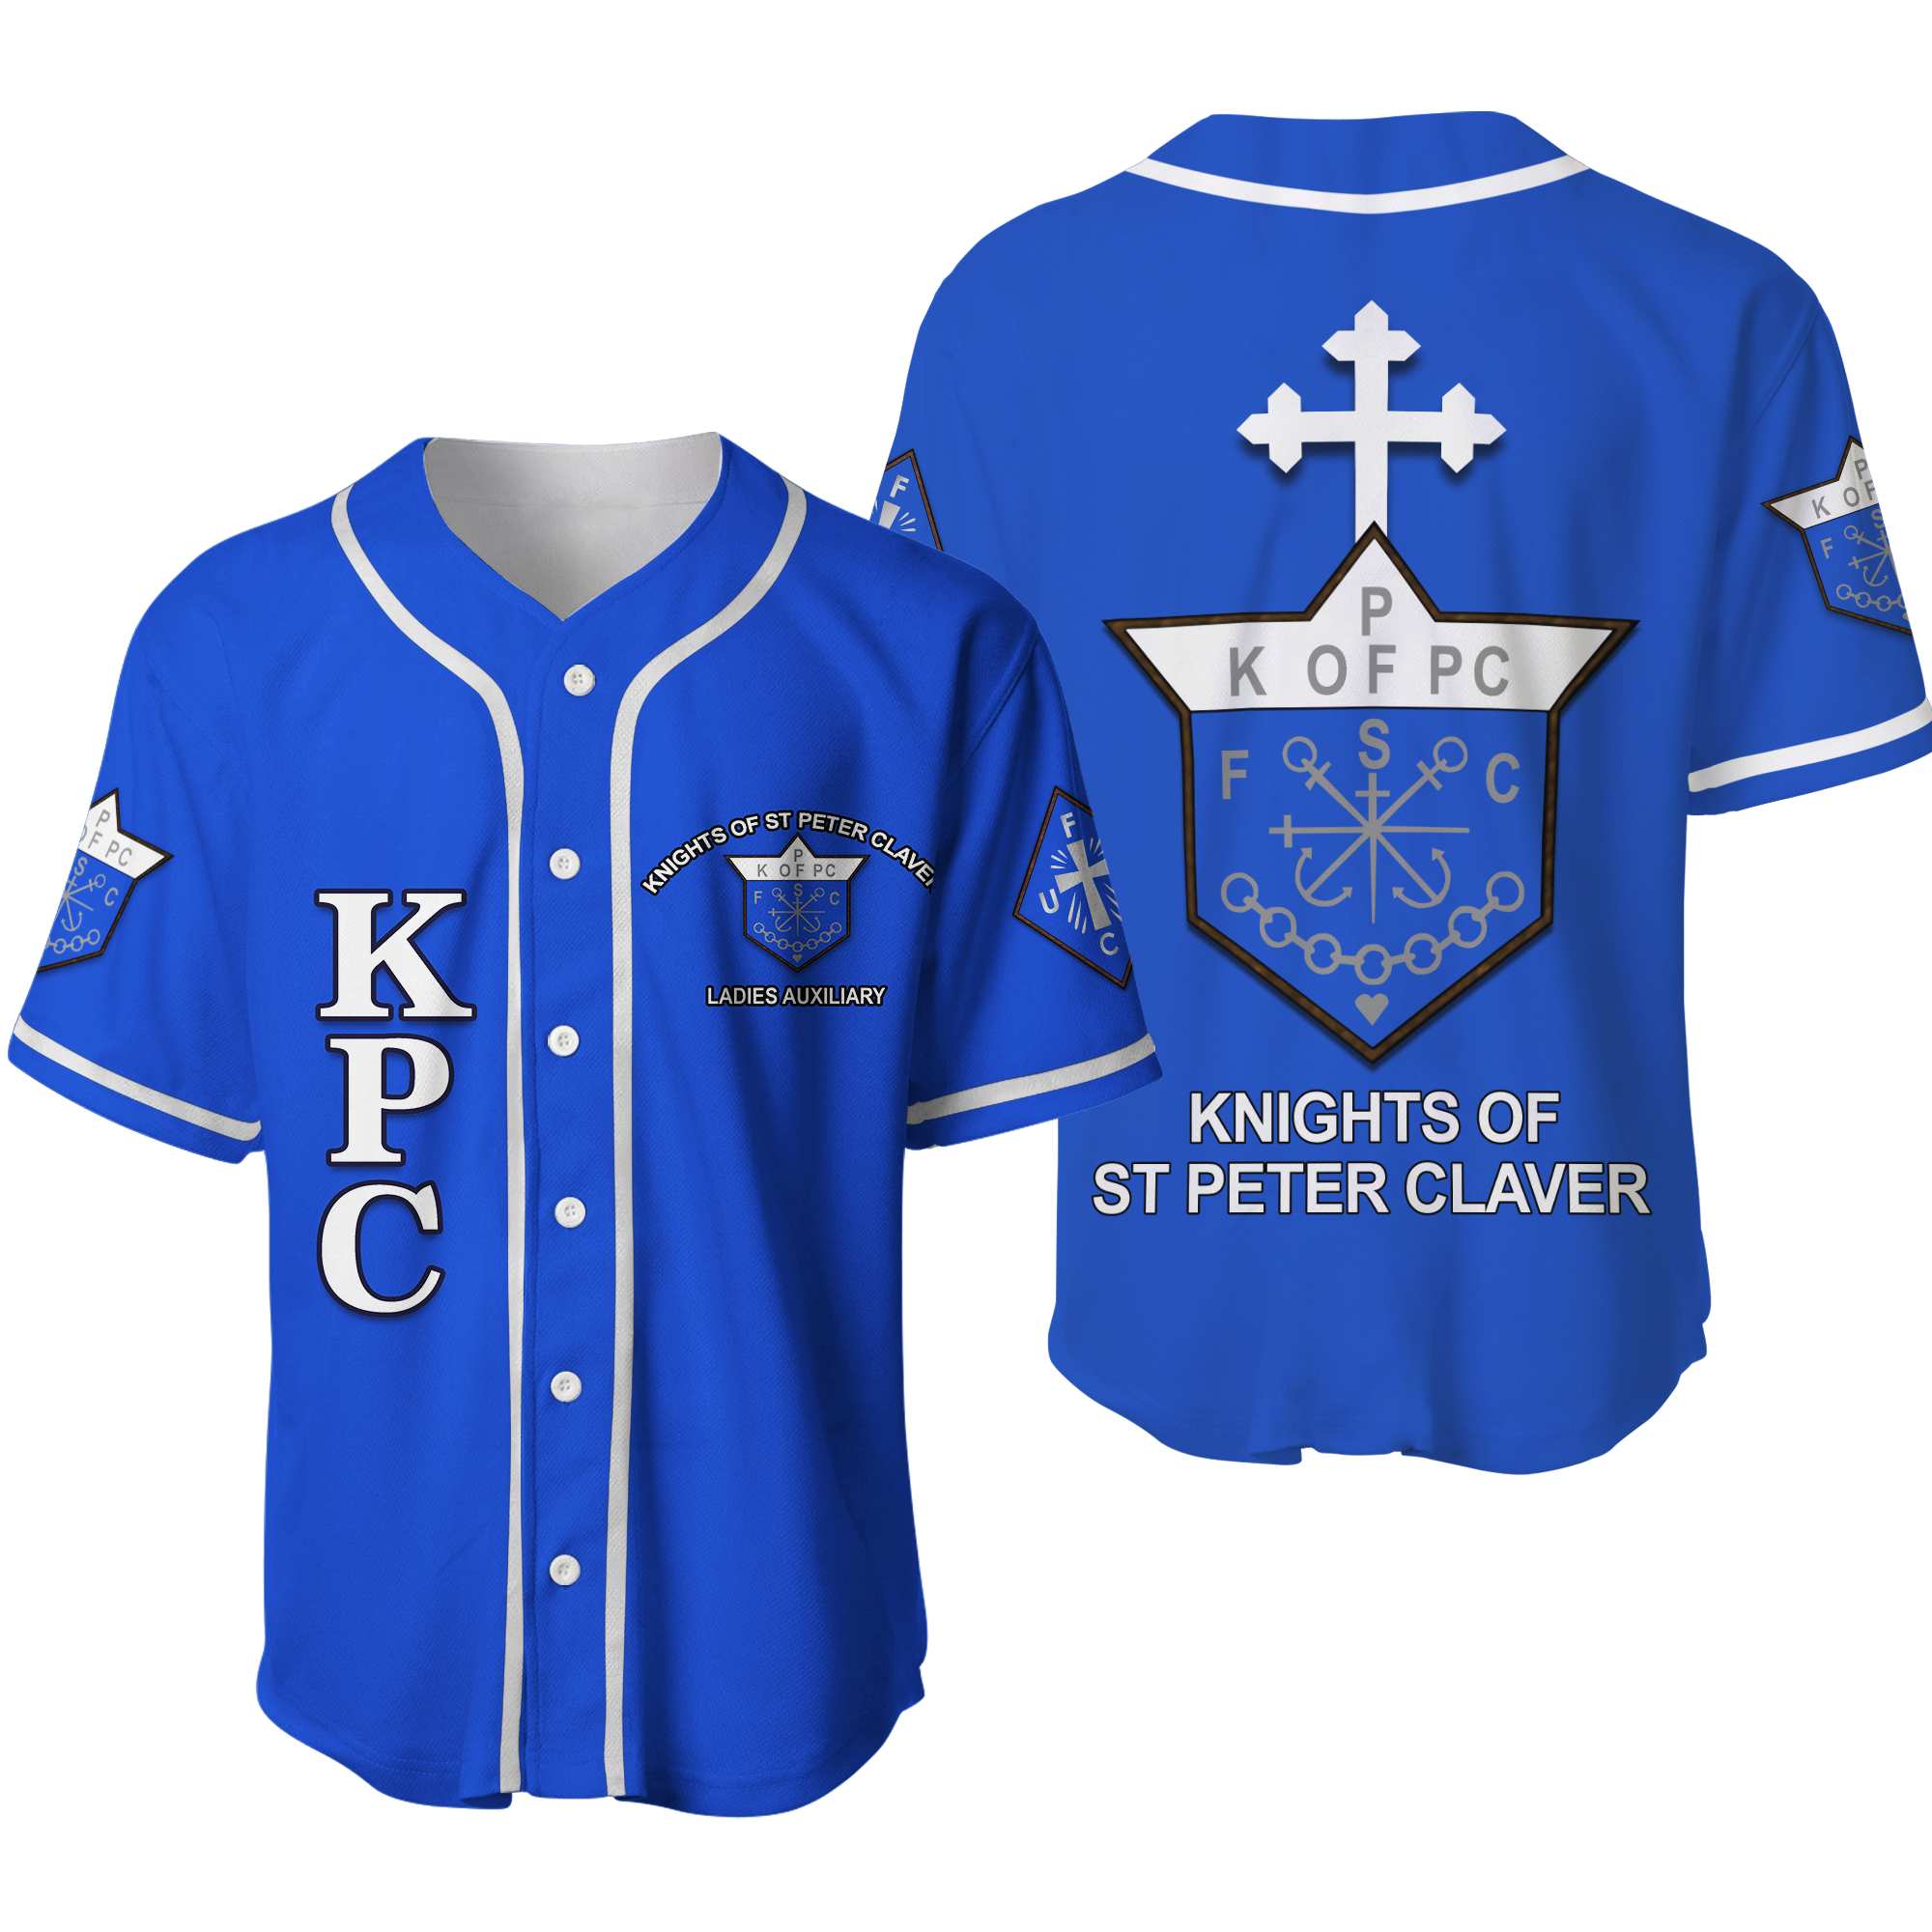 knights-of-peter-claver-and-ladies-auxiliary-baseball-jersey